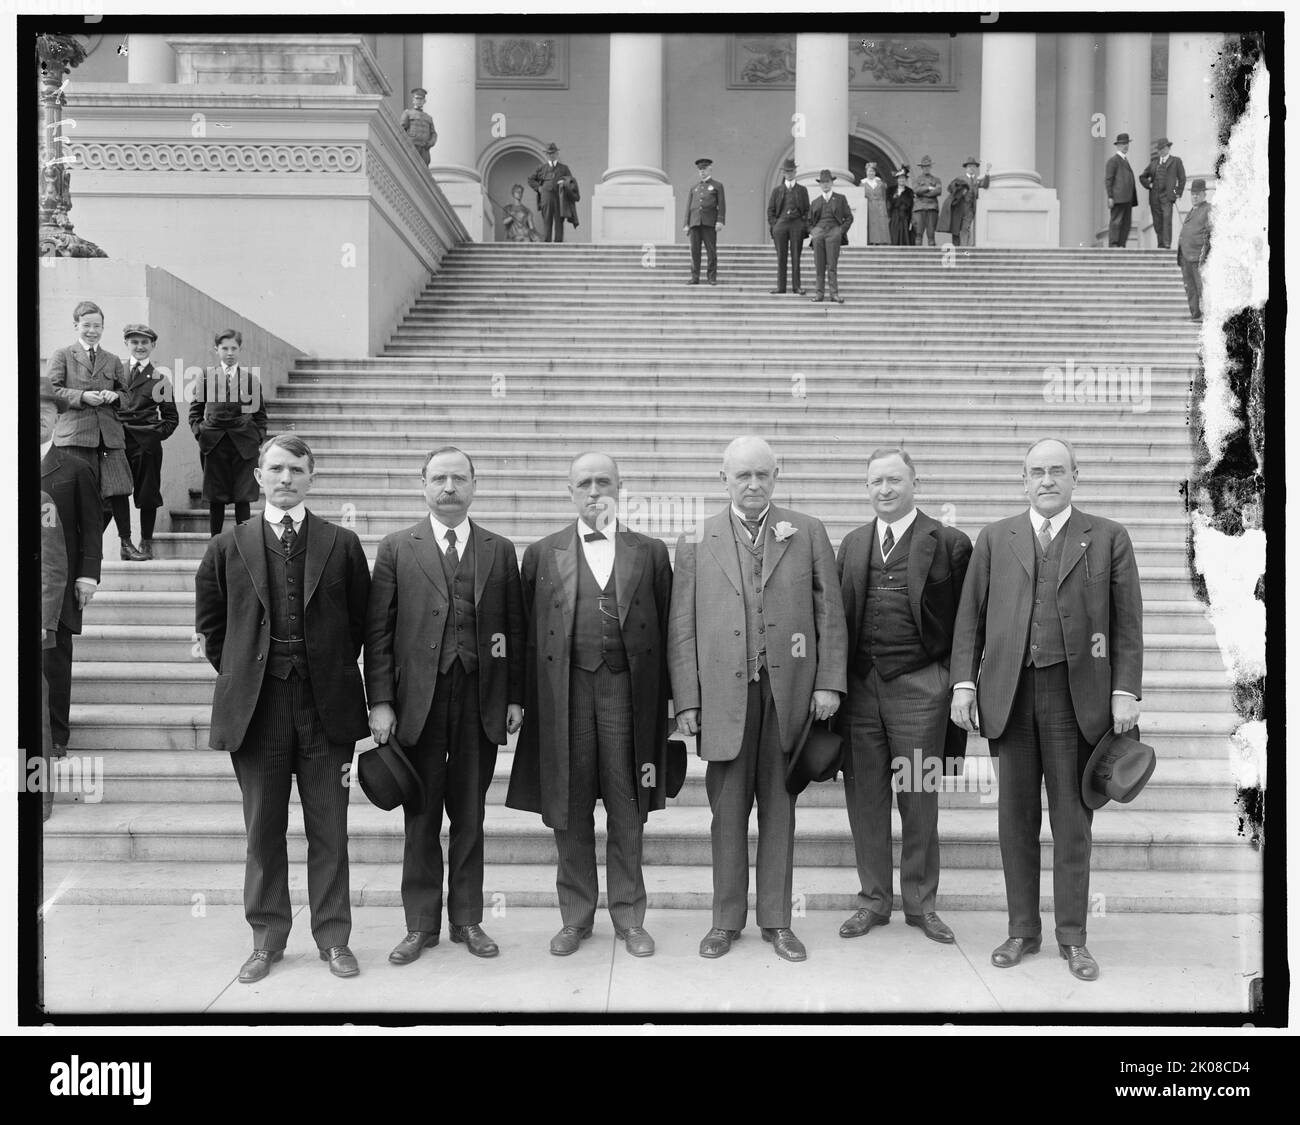 Fraternity Group, between 1910 and 1920. Men posing at the bottom of the Capitol Building steps, Washington, D.C. Note boys in plus fours behind. Stock Photo